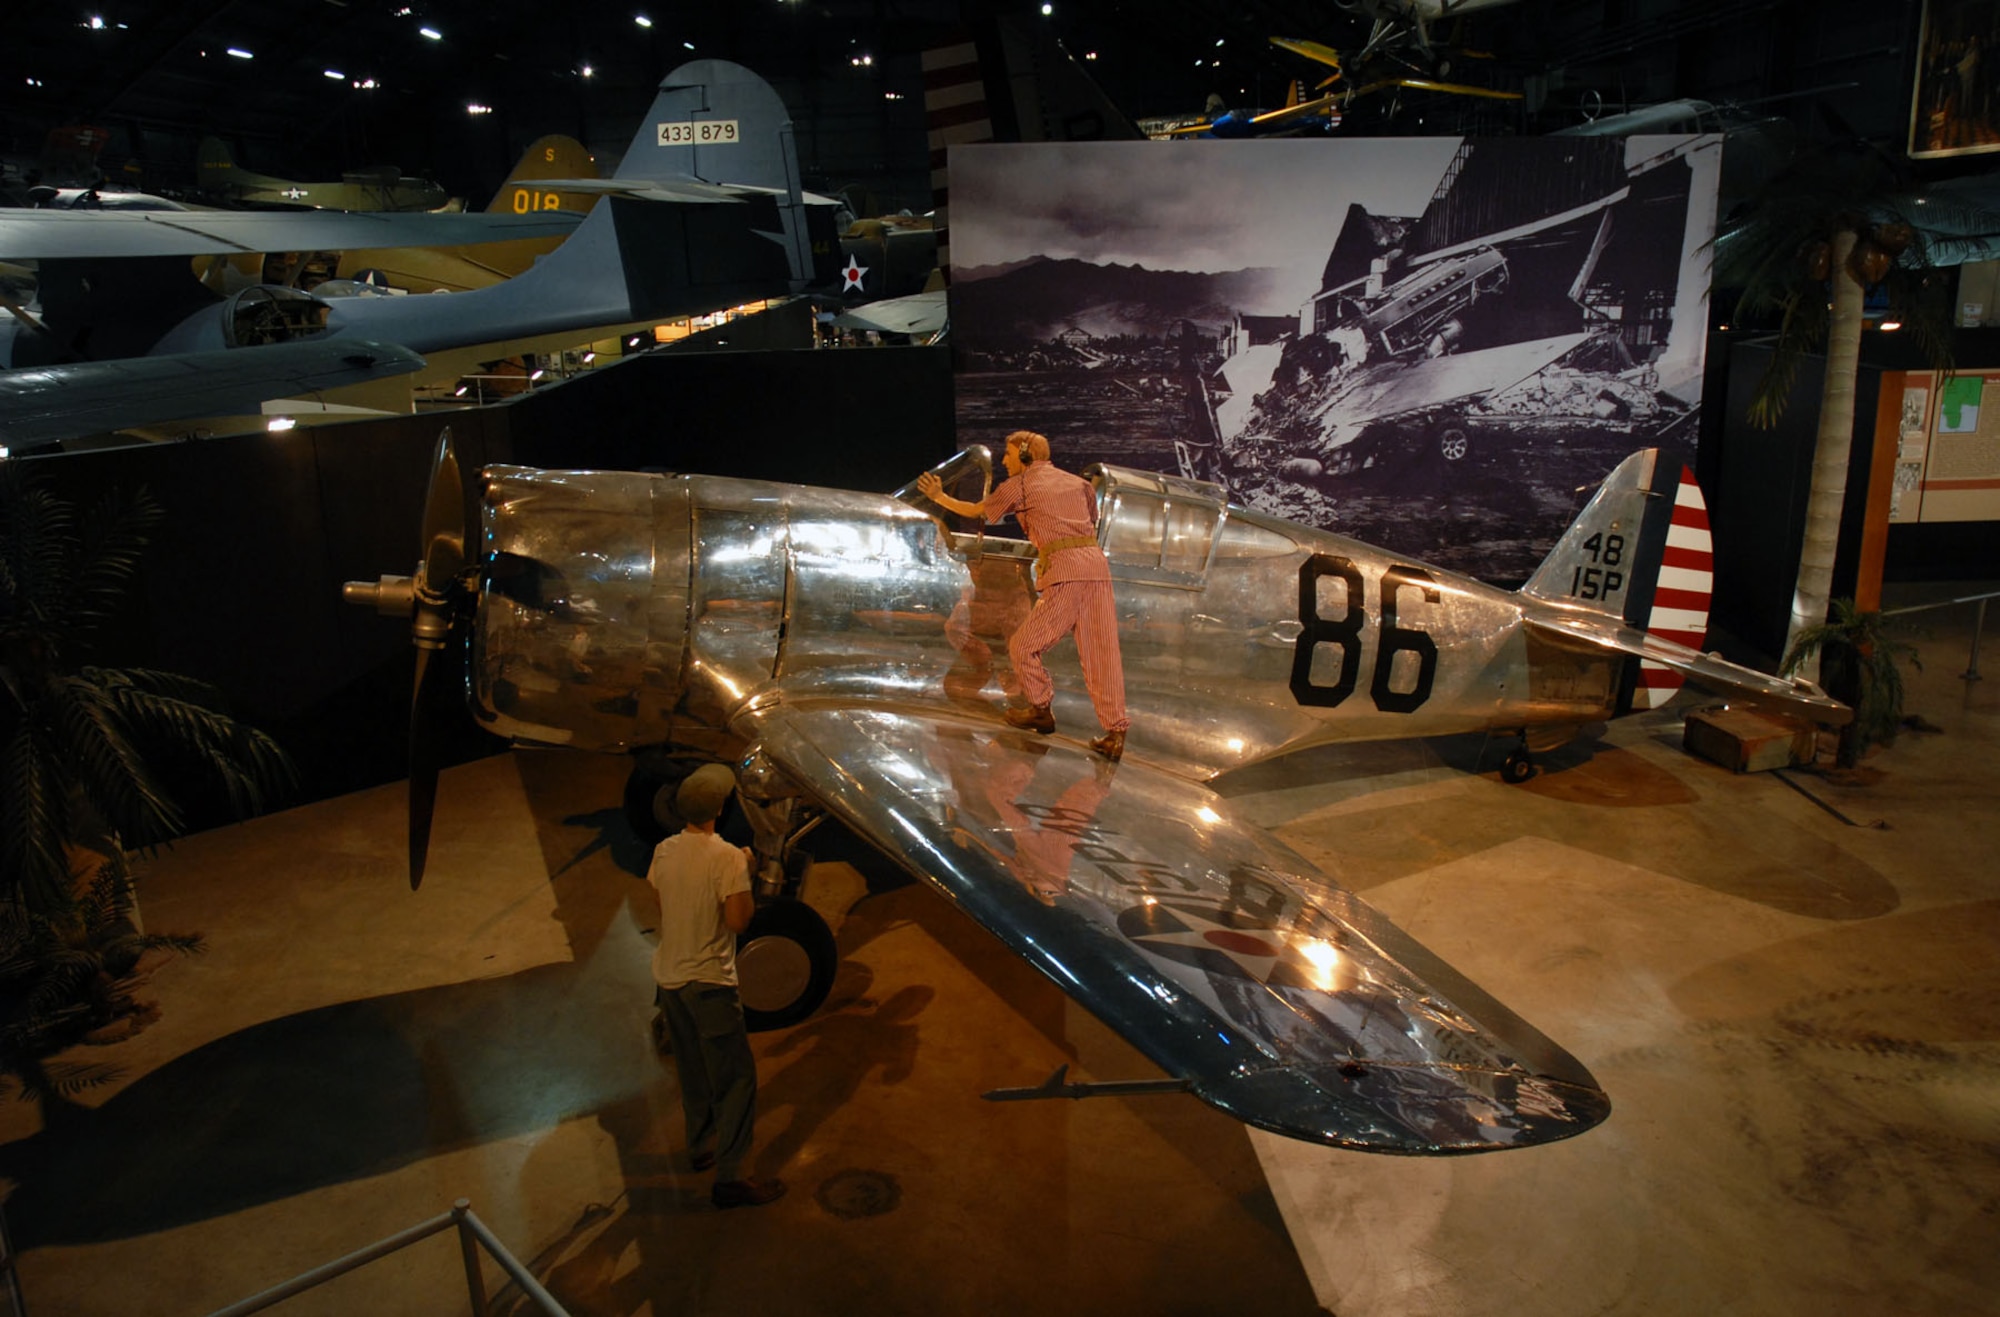 DAYTON, Ohio -- Curtiss P-36A Hawk in the World War II Gallery at the National Museum of the United States Air Force. (U.S. Air Force photo)